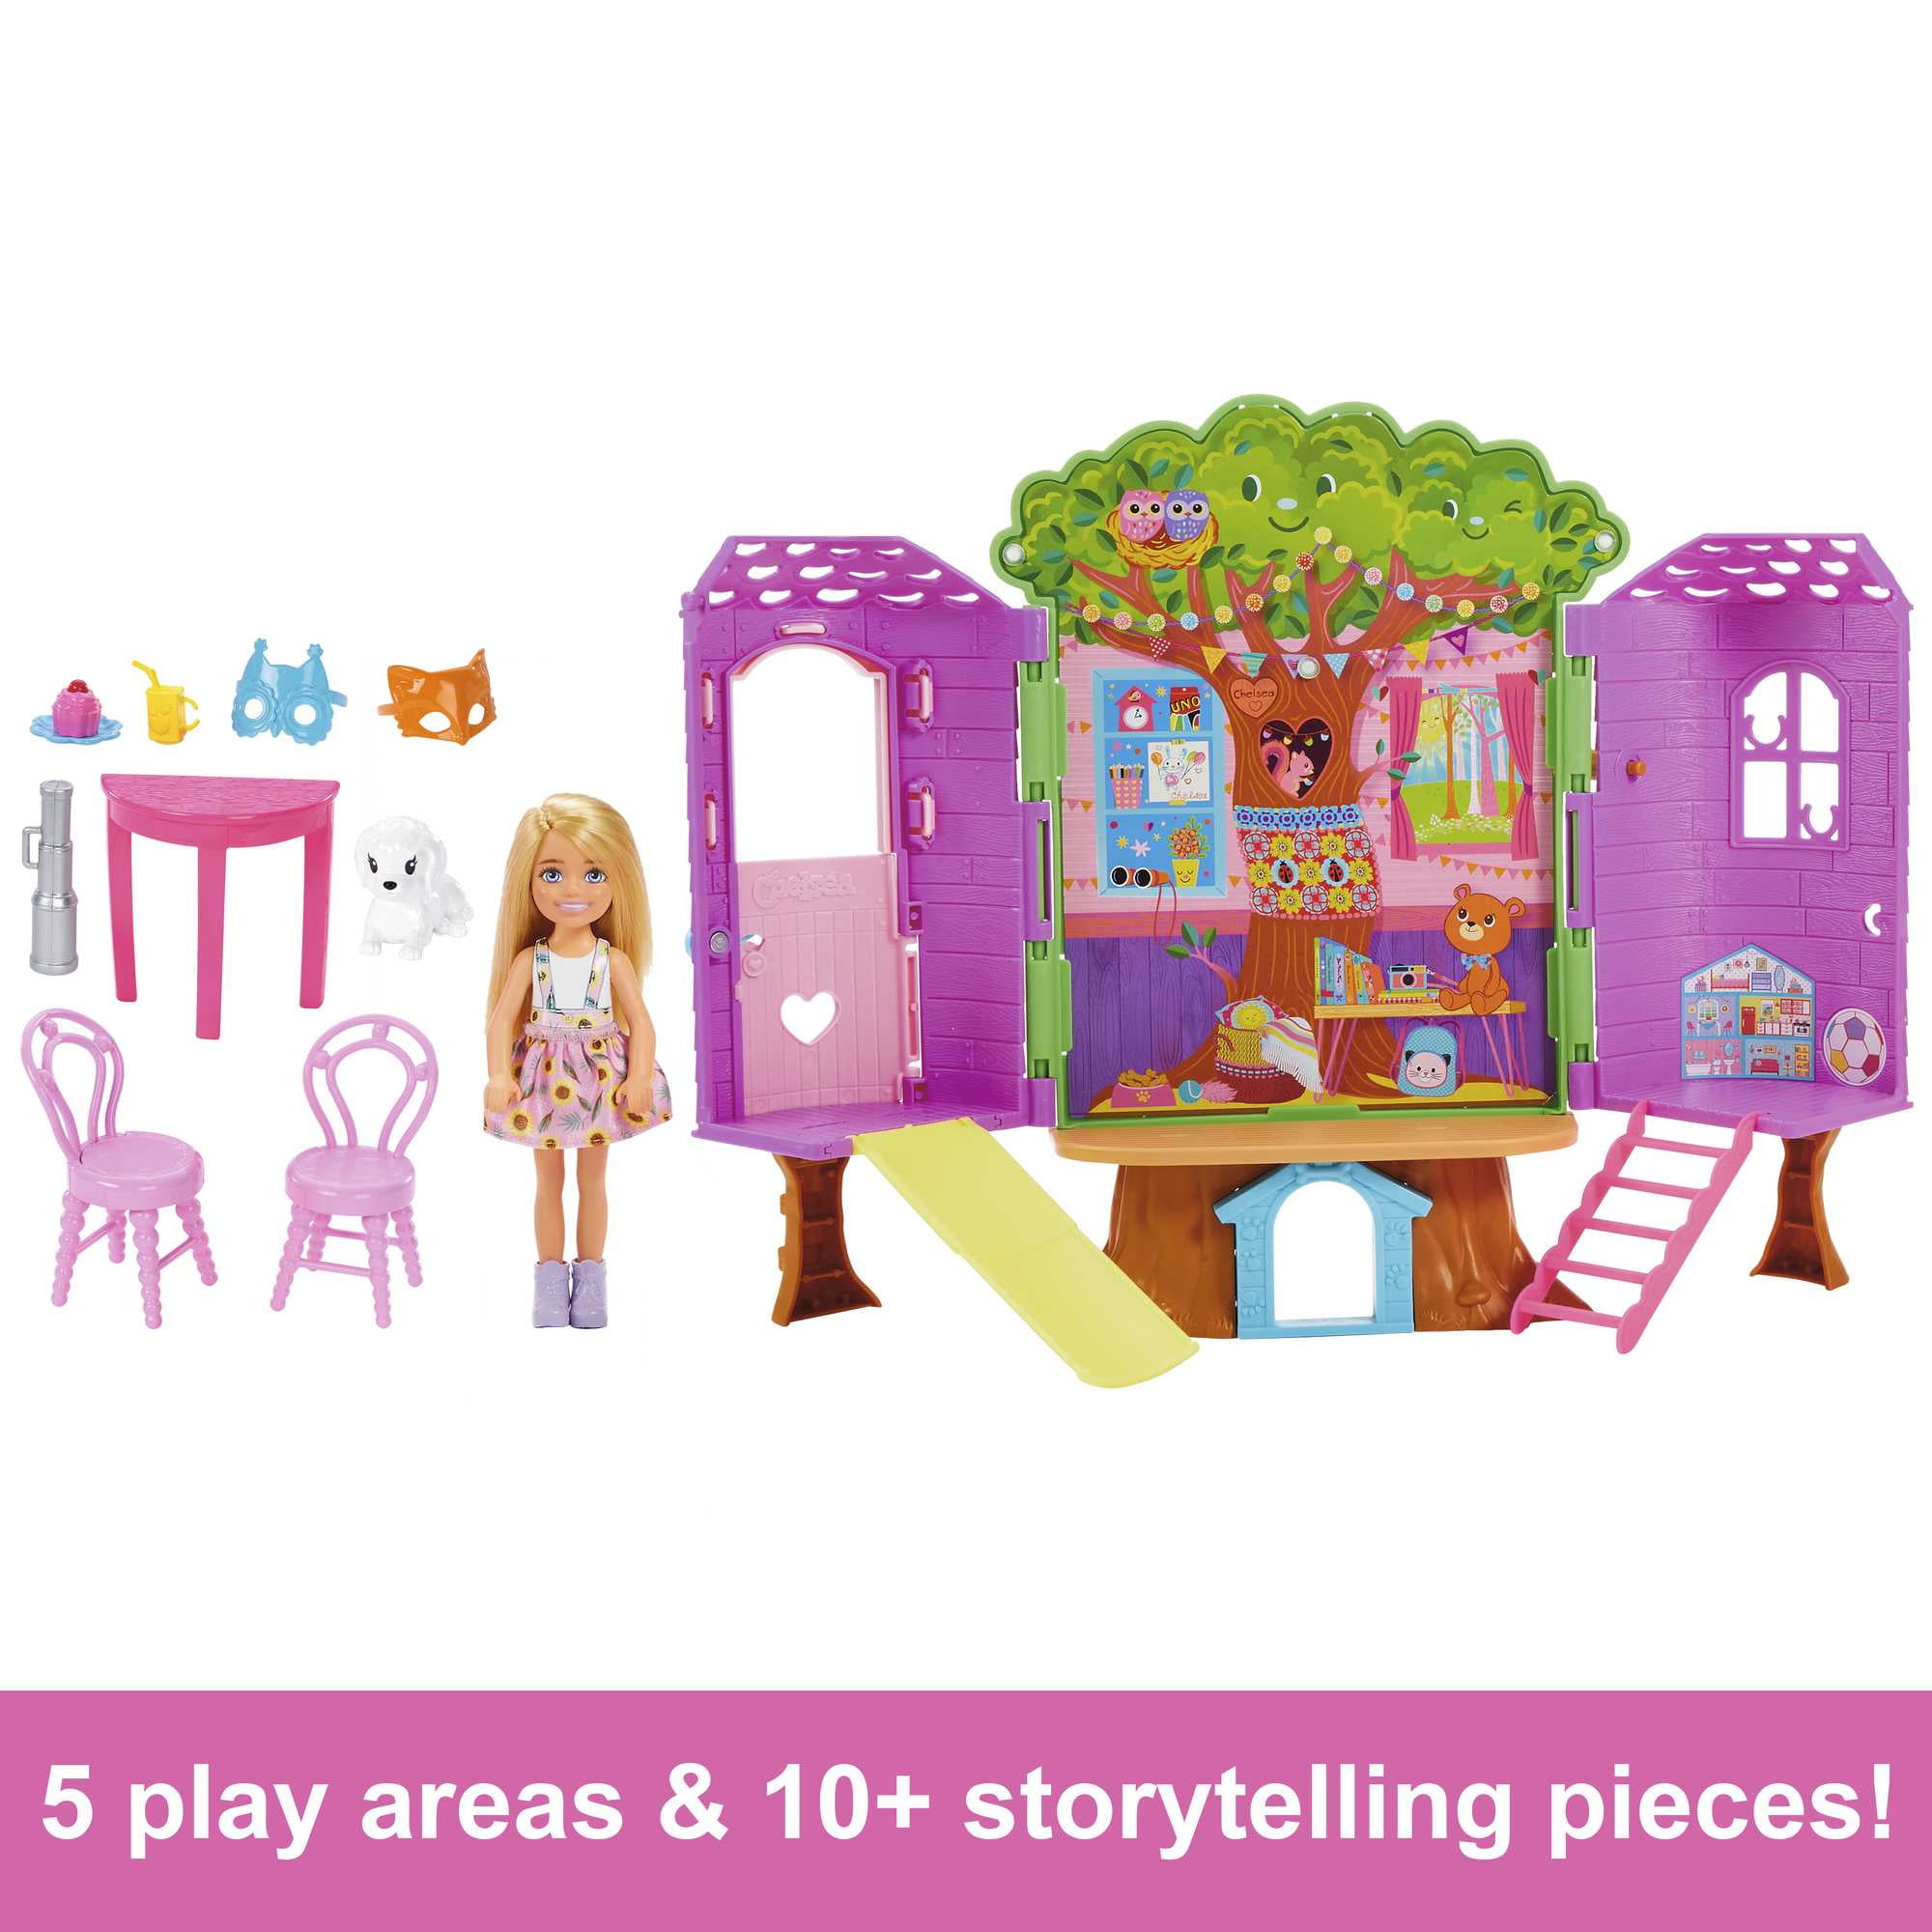 Barbie Club Chelsea Treehouse Dollhouse Playset with Accessories -  Walmart.com